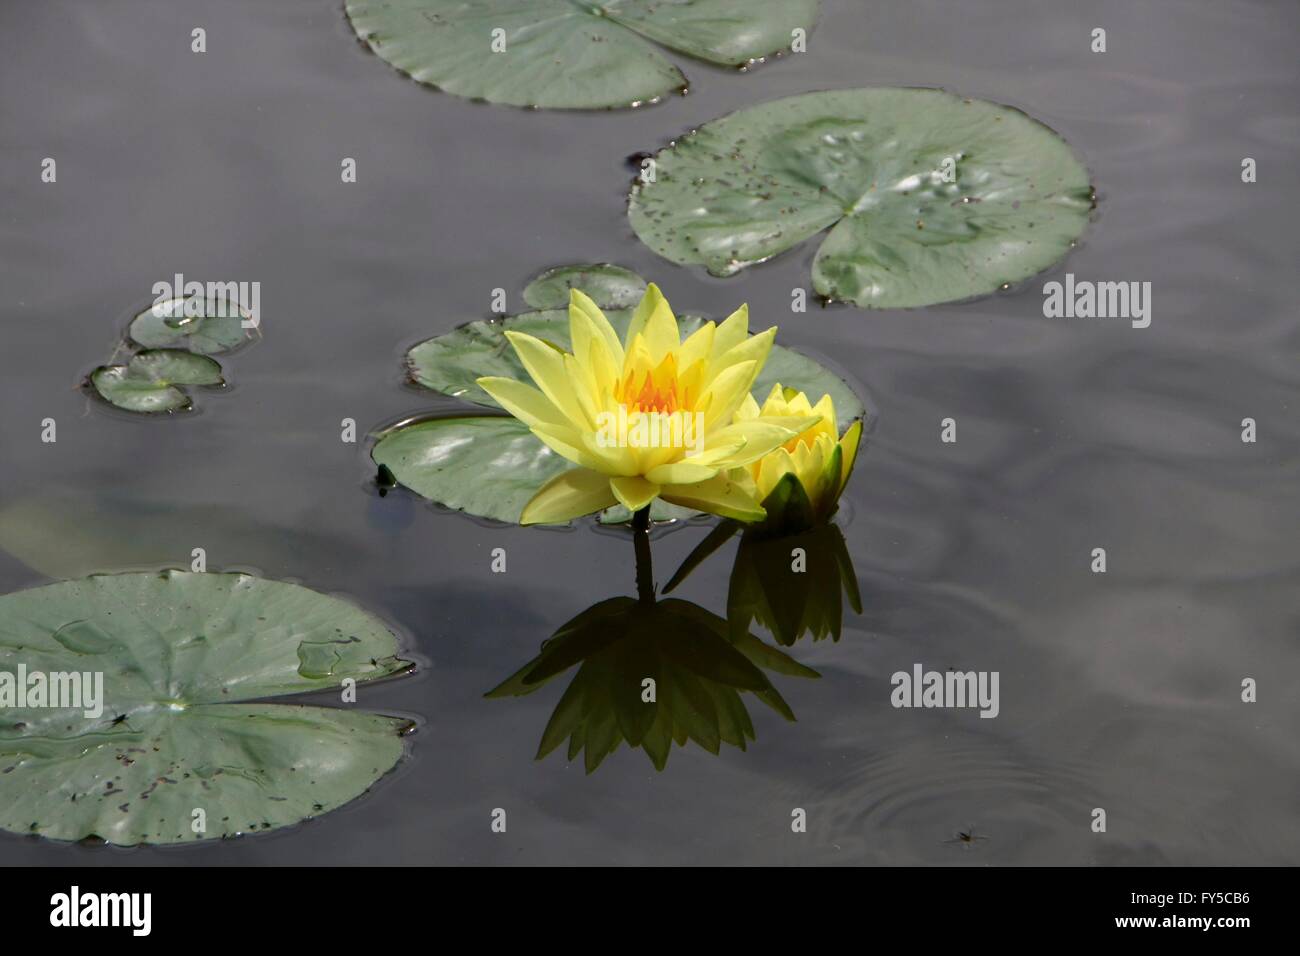 A Lily pond with different colored water lilies. The water lily (Nymphaea) is a genus in the family Nymphaeaceae. Worldwide, this genus comprises about fifty species. Eckardts, Thuringia, Germany, Europe Date: July 28, 2014 Stock Photo